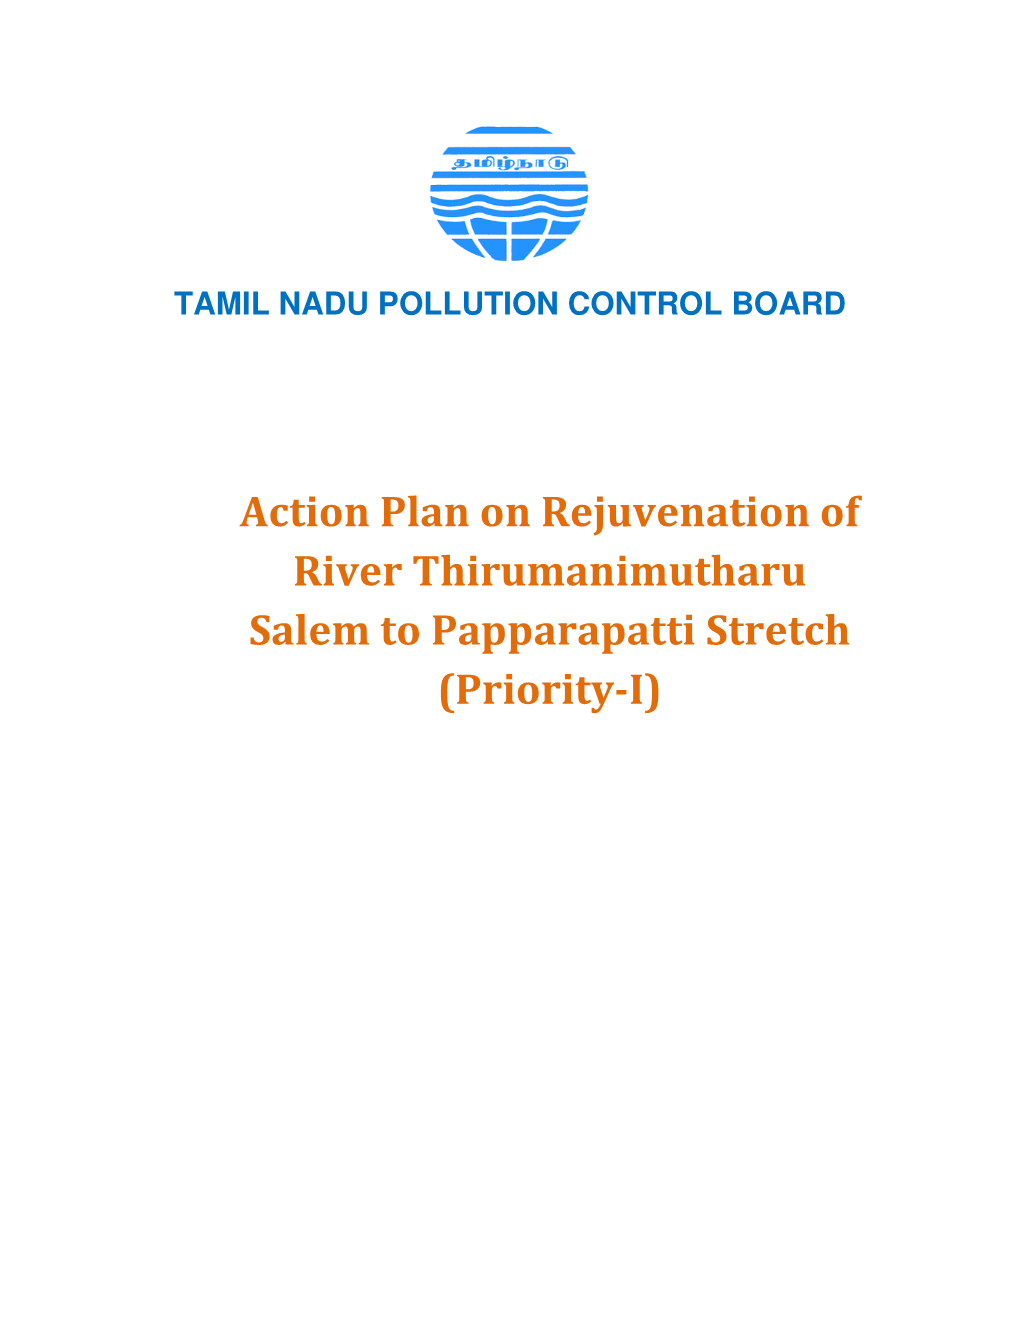 Action Plan on Rejuvenation of River Thirumanimutharu Salem to Papparapatti Stretch (Priority-I)